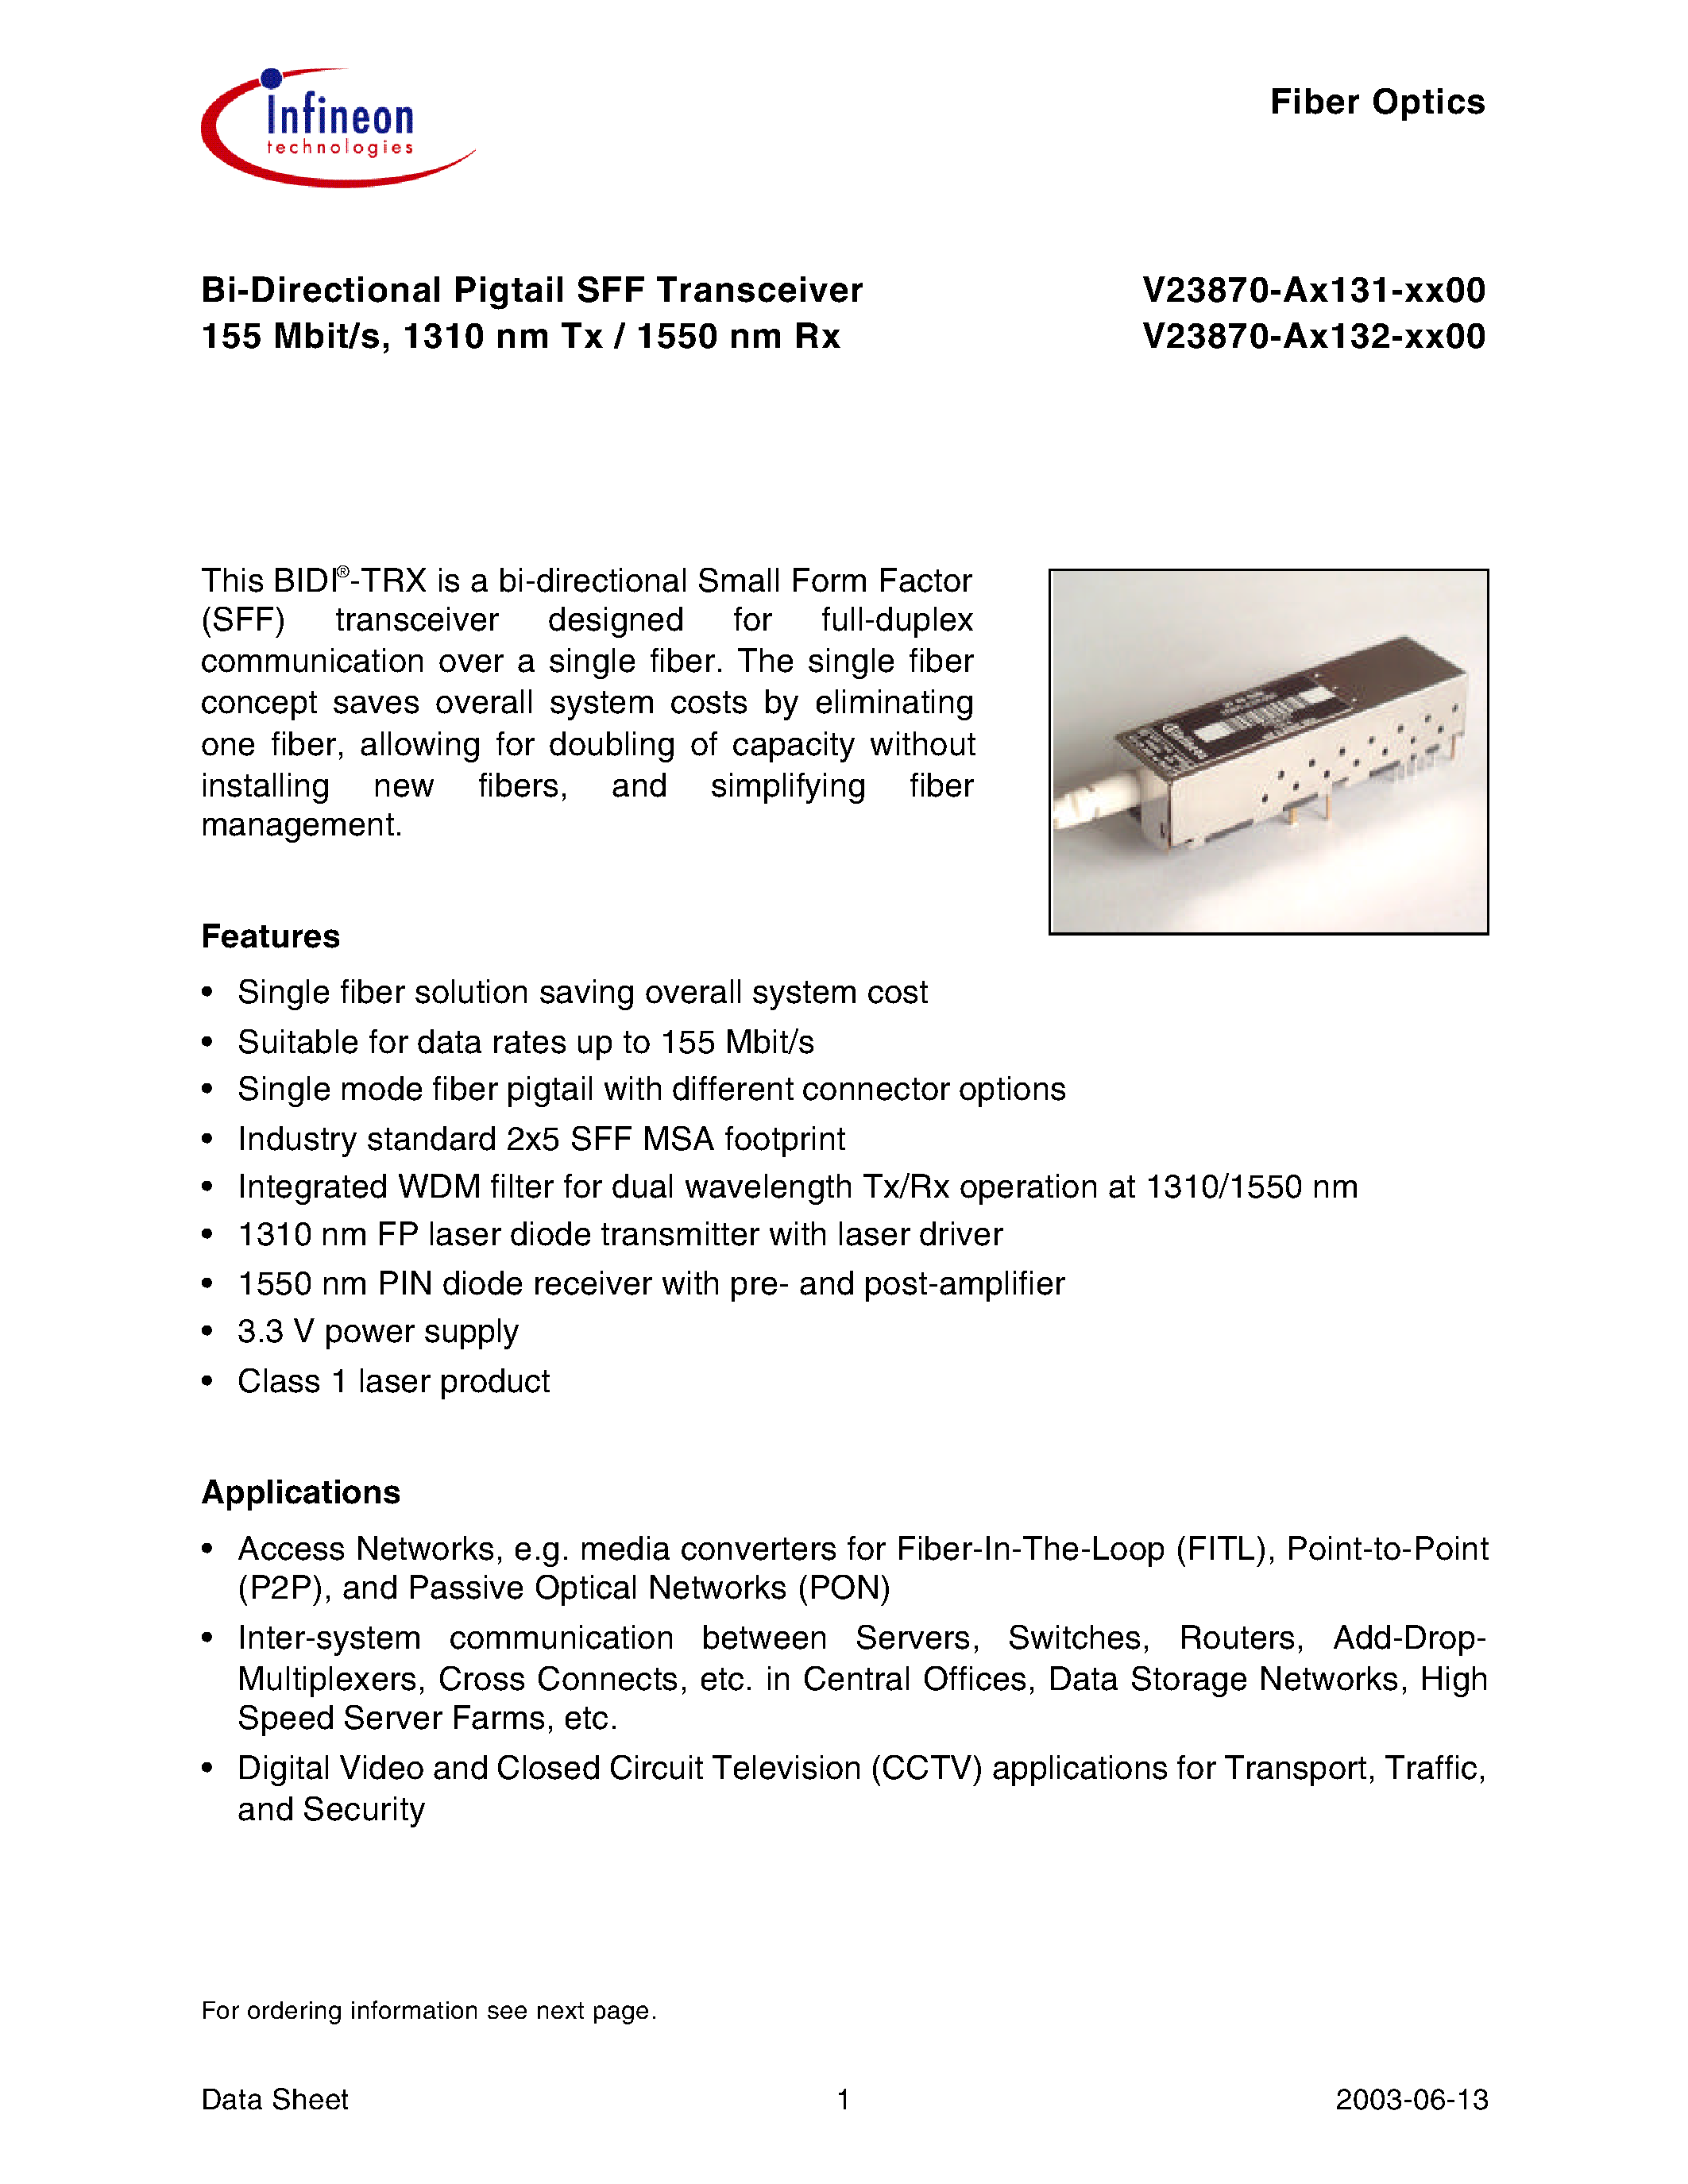 Datasheet V23870-A3131-F500 - Bi-Directional Pigtail SFF Transceiver 155 Mbit/s/ 1310 nm Tx / 1550 nm Rx page 1